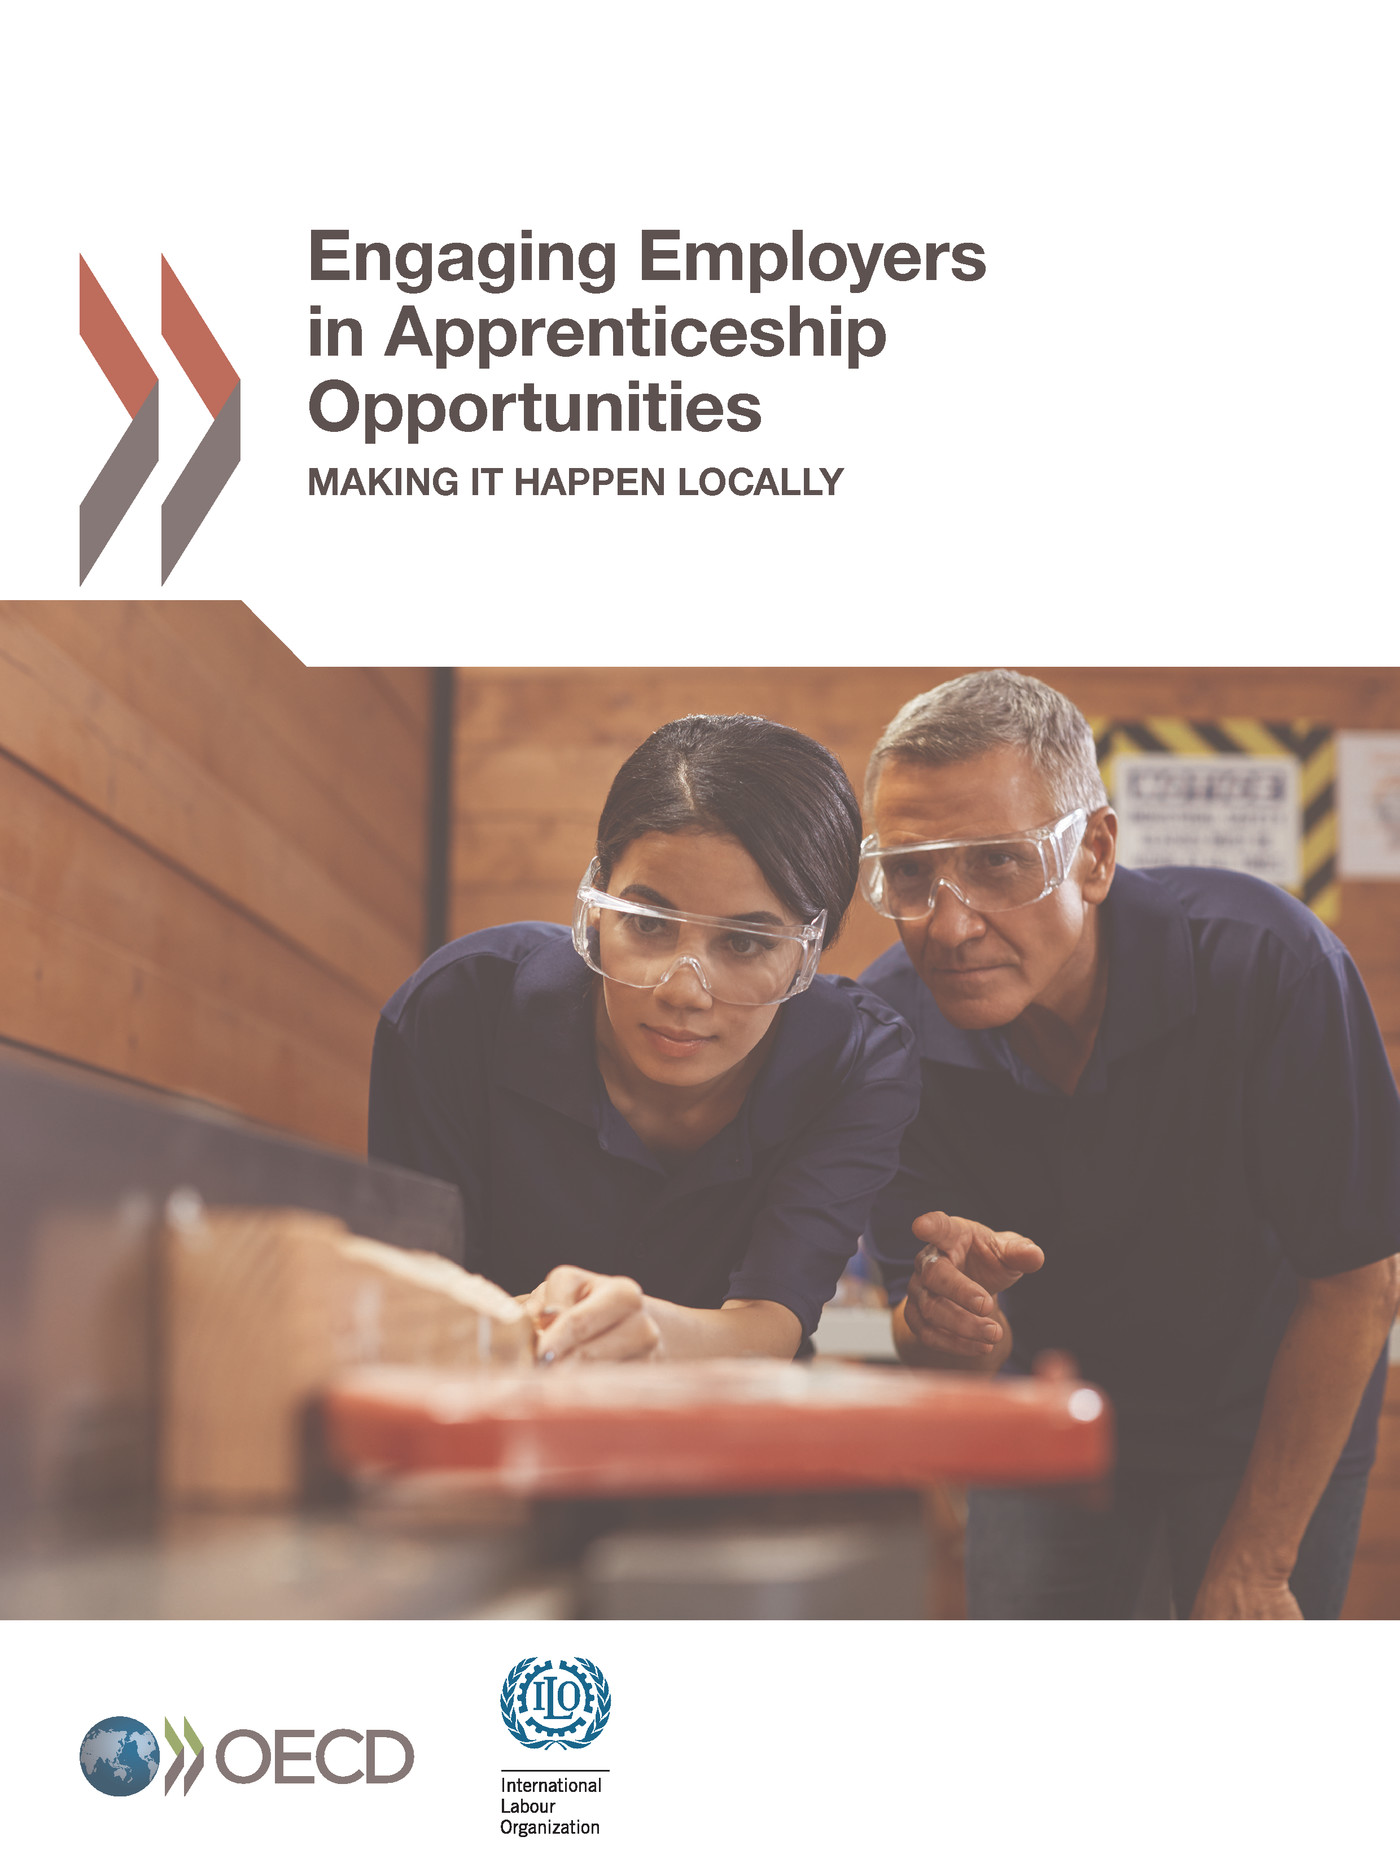 Engaging Employers in Apprenticeship Opportunities -  Collectif - OCDE / OECD